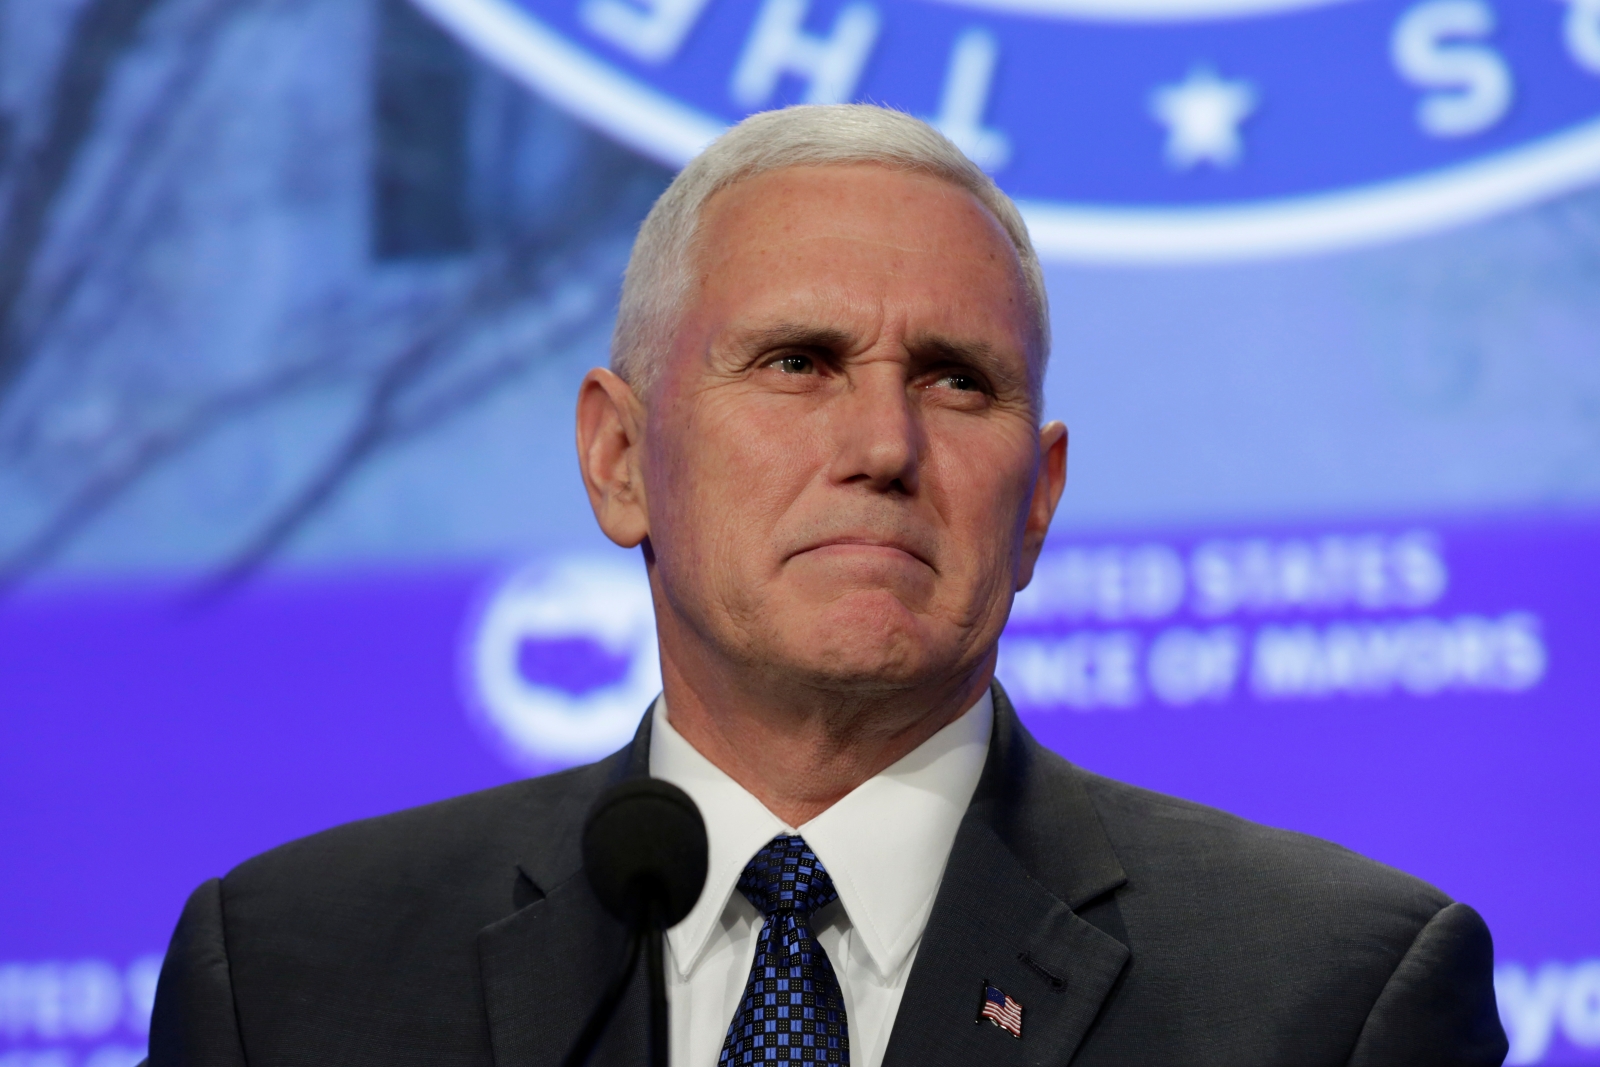 University students to walk out of Mike Pence speech over LGBT rights